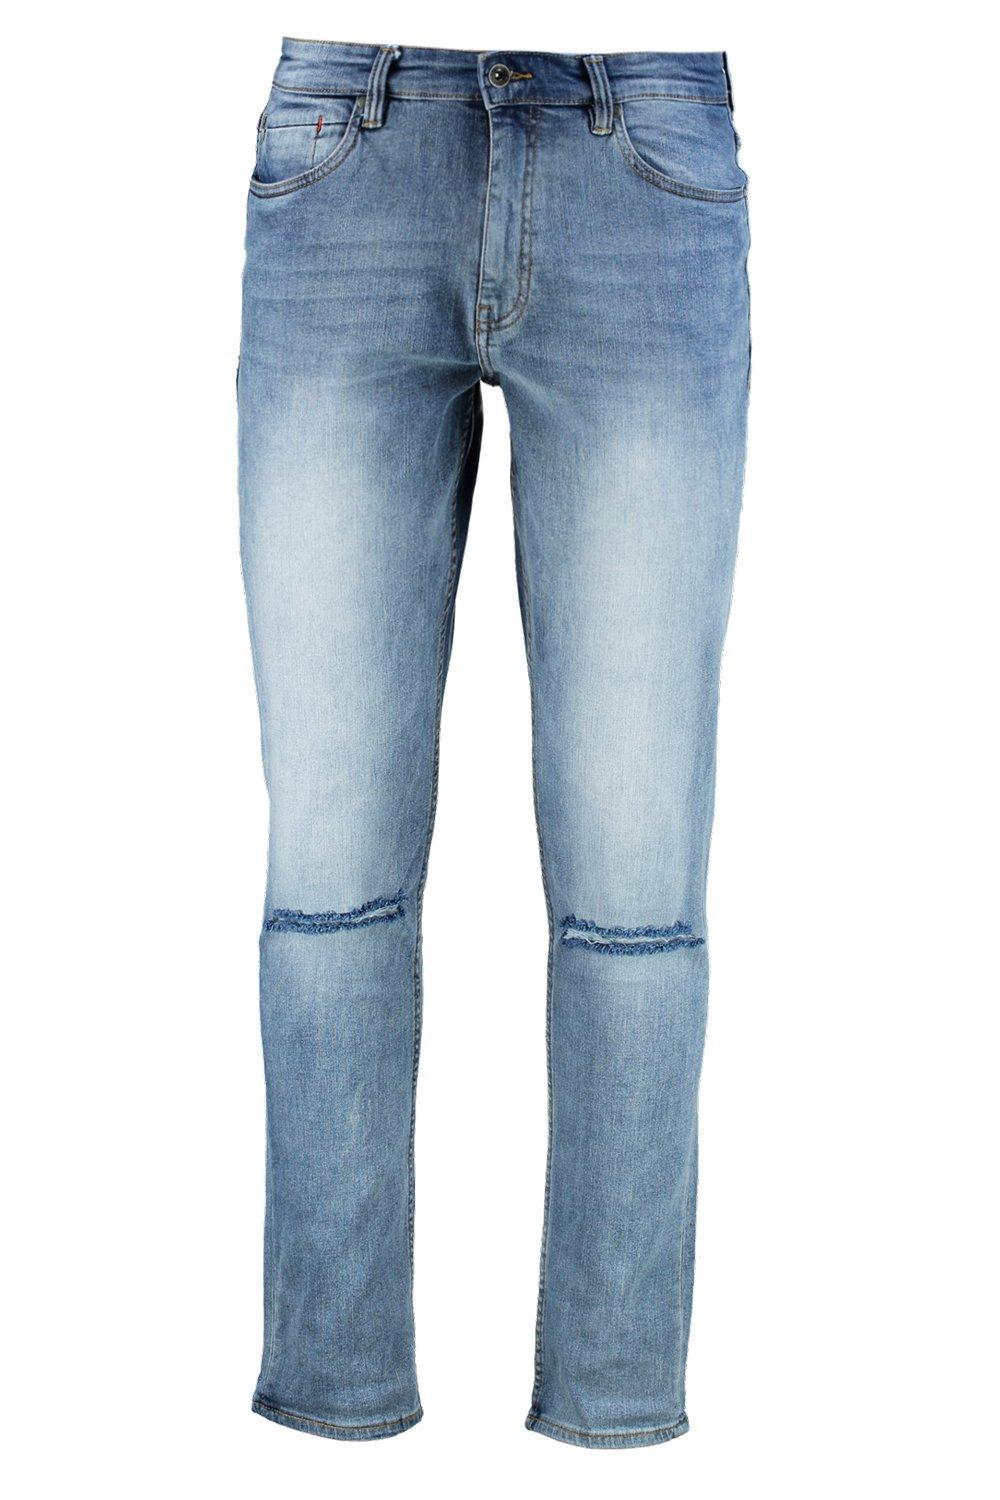 Lyst - Boohoo Super Skinny Fit Jeans With Ripped Knees in Blue for Men